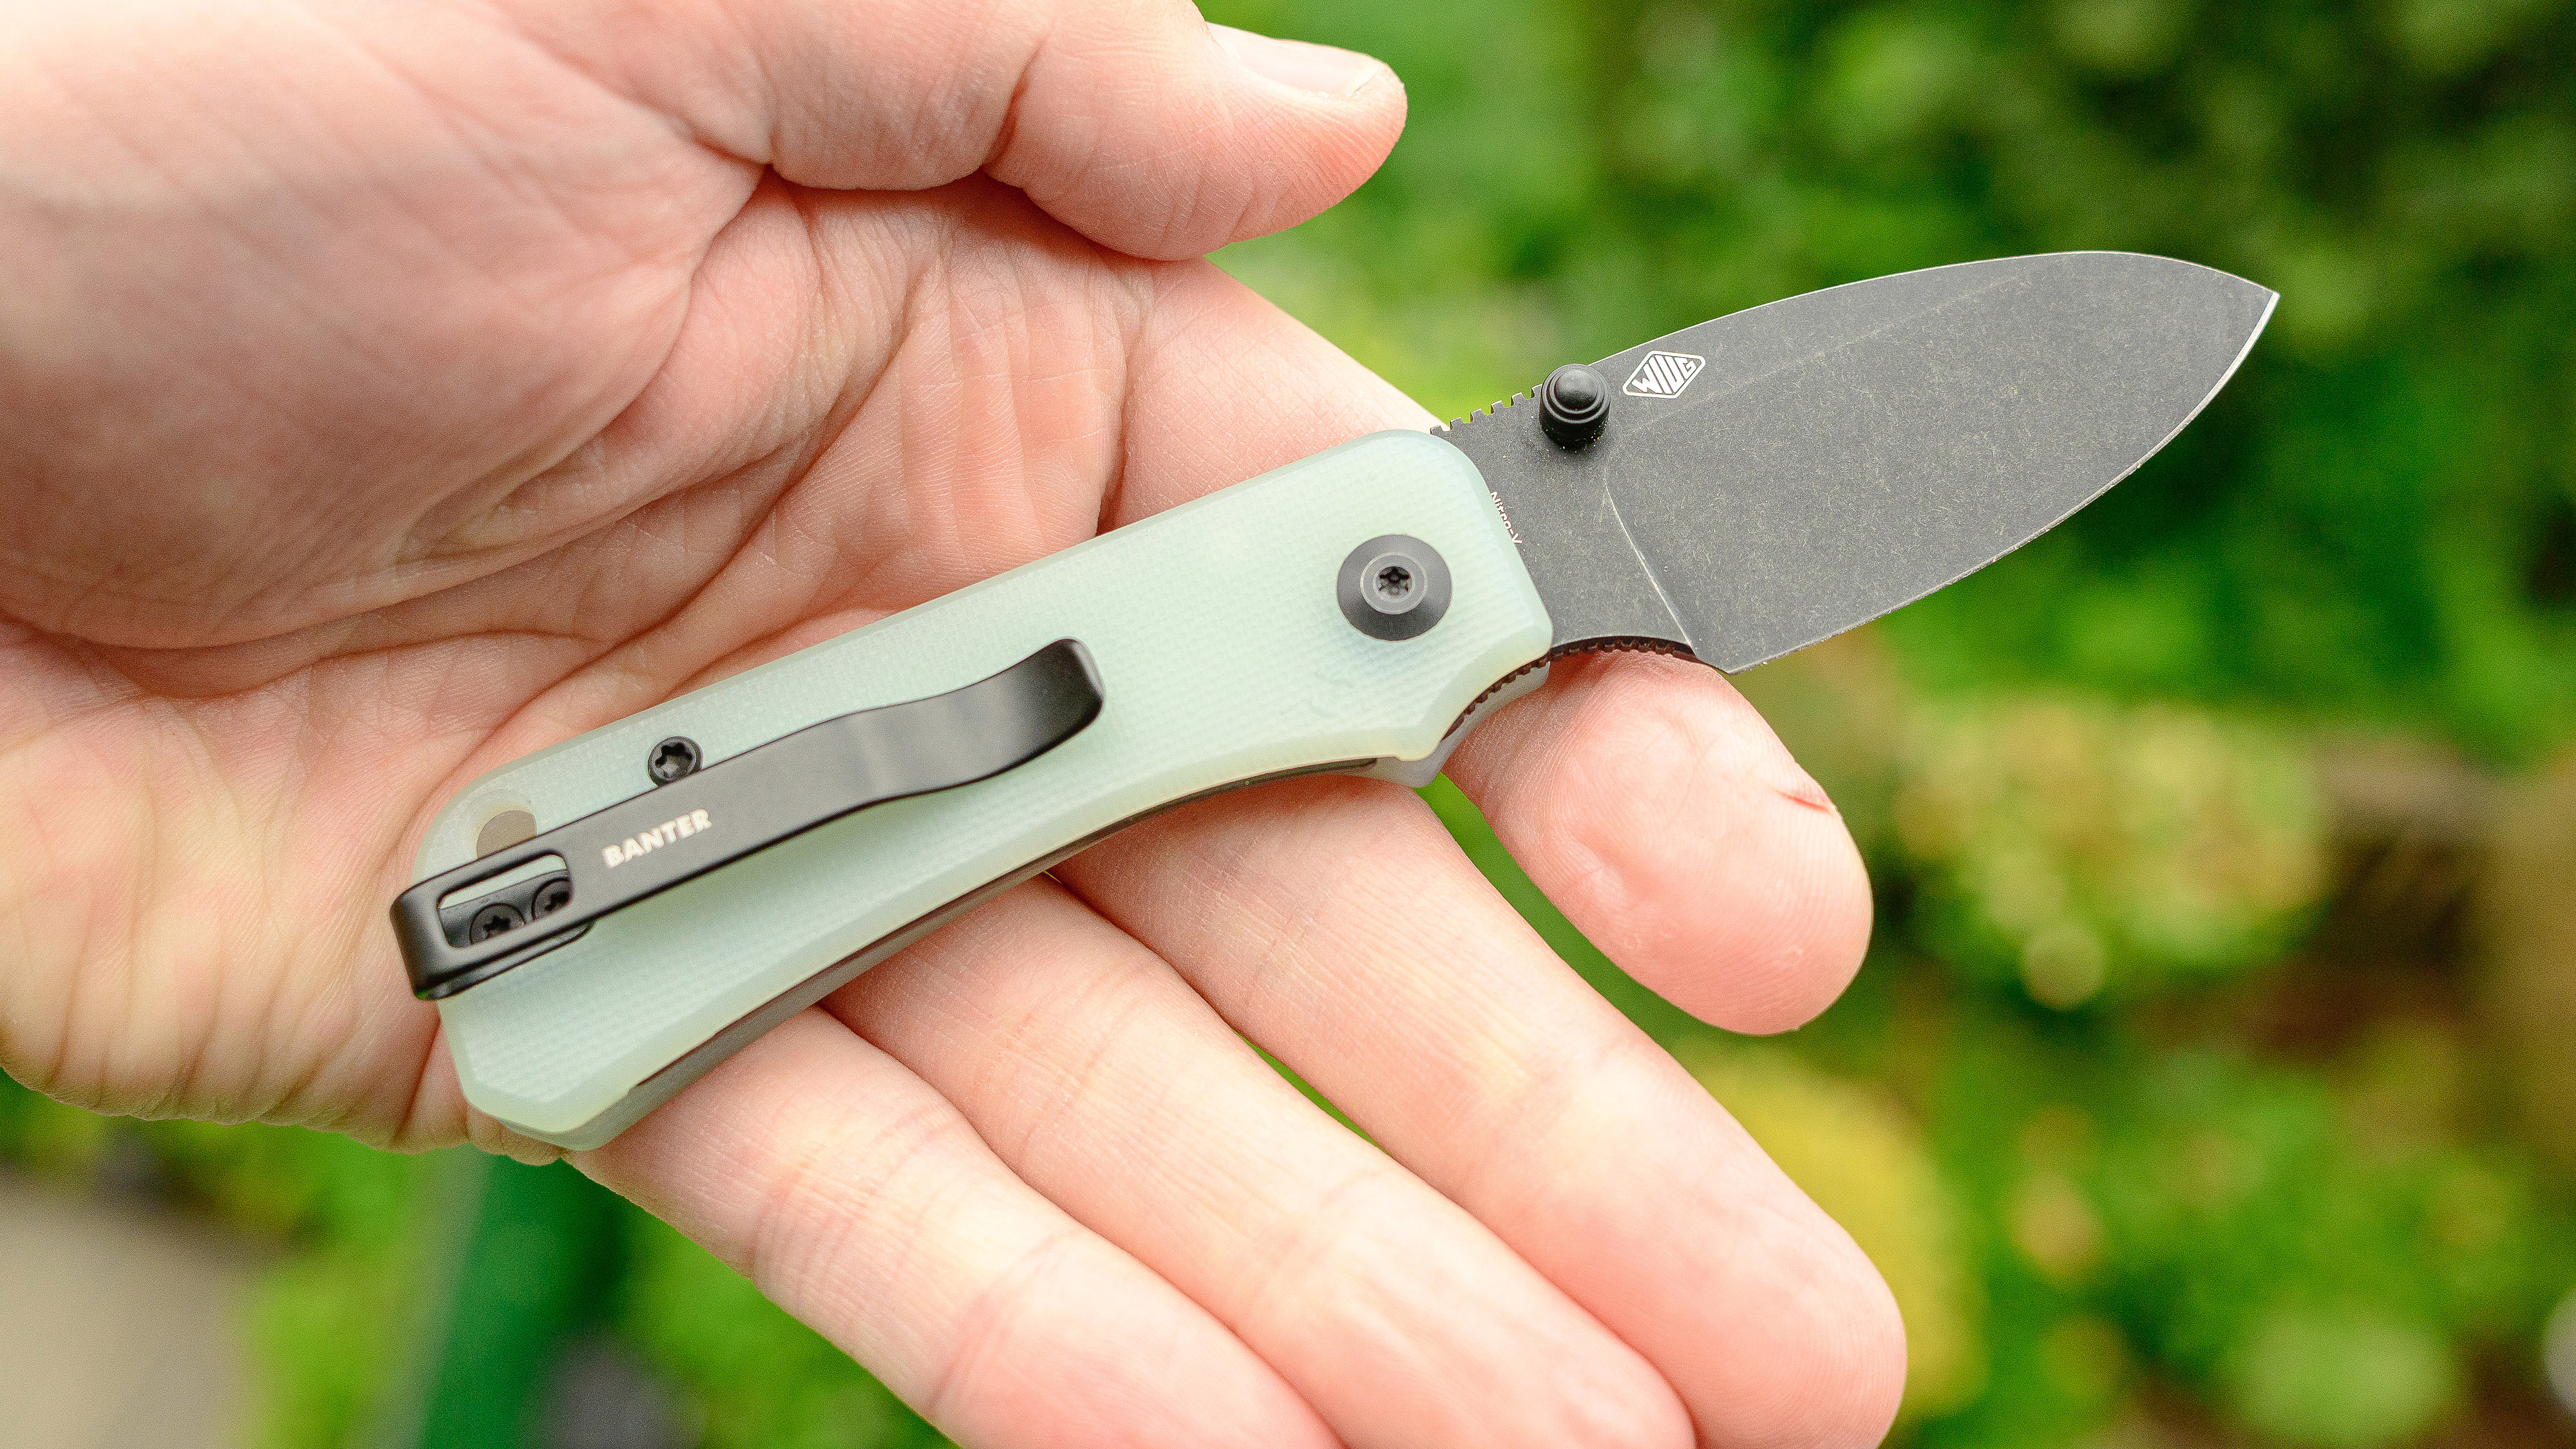 The Civivi Baby Banter folding pocket knife in a user's hand with a light green handle.